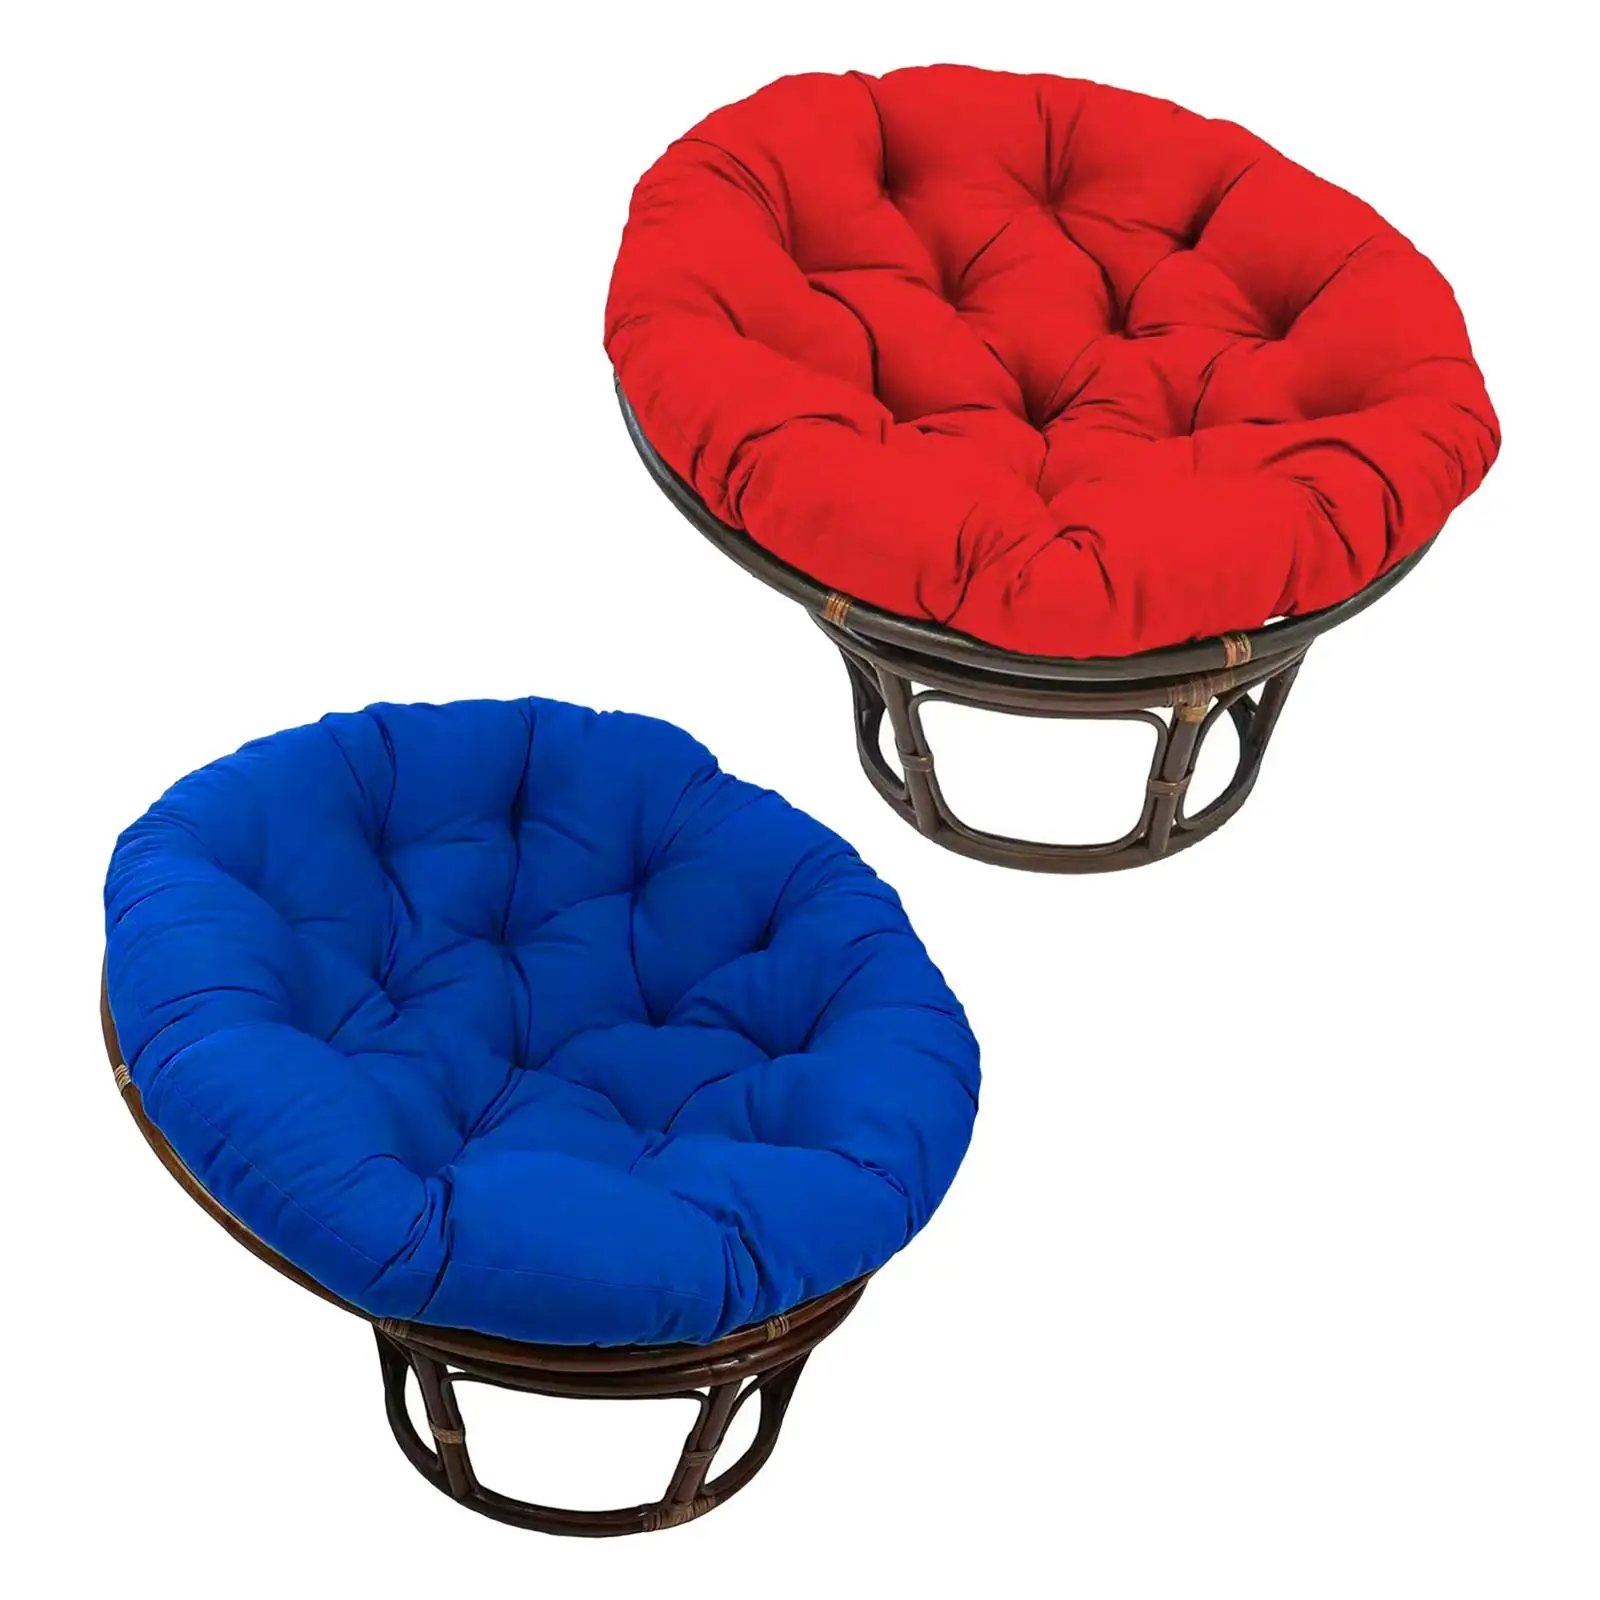 Hanging Egg Chair Cushion Washable for Indoor or Outdoor Swing Chairs Egg Chair Hammock Chair Hanging Beds Rocking Chairs